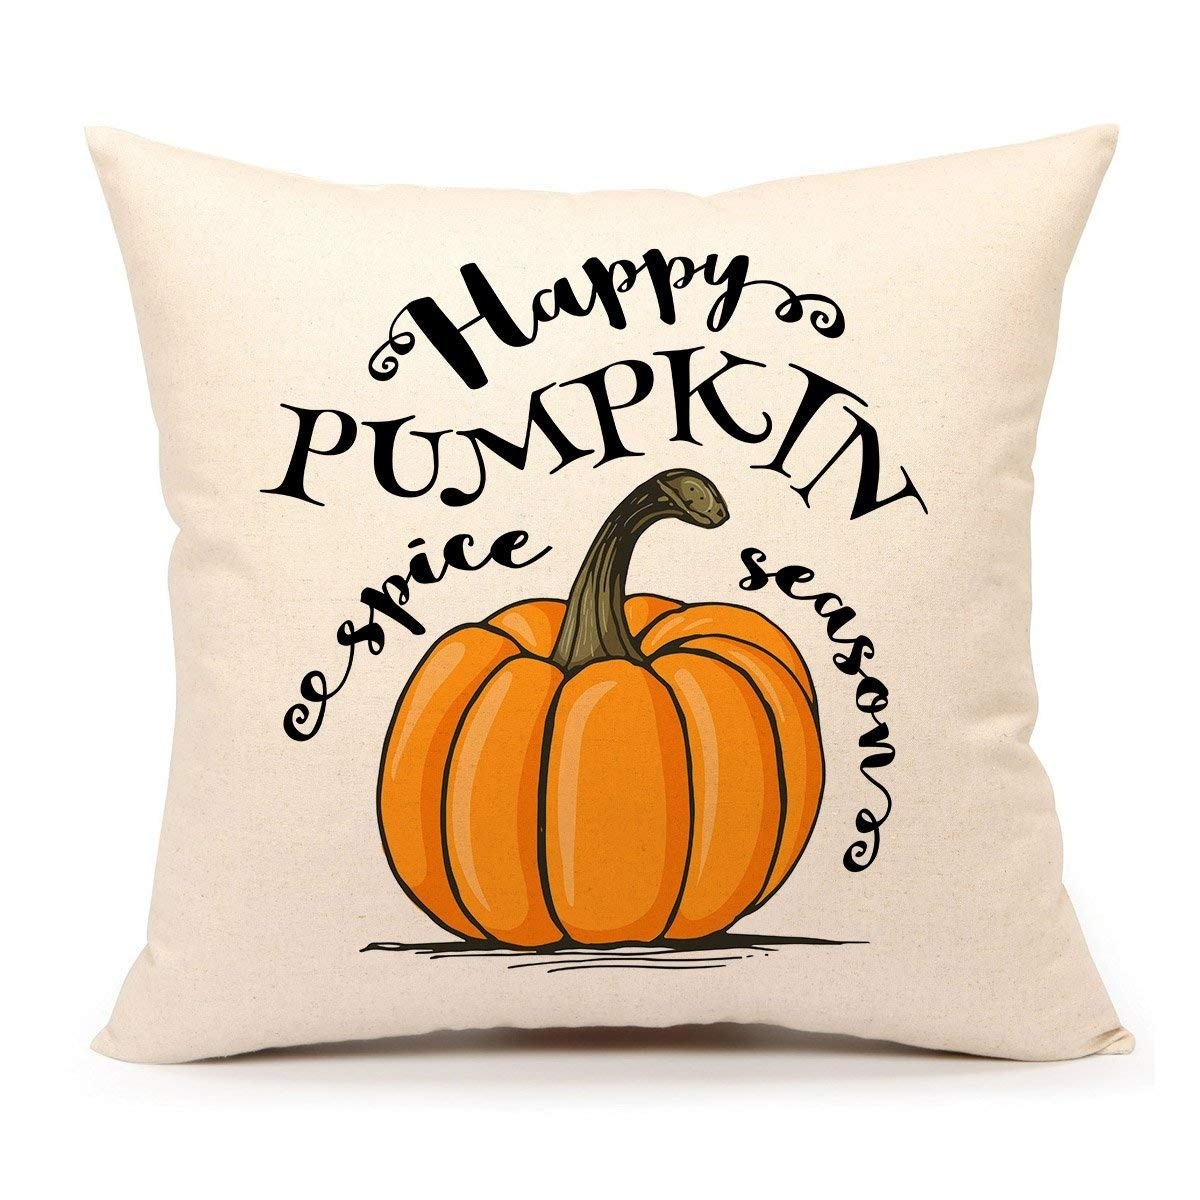 https://ak1.ostkcdn.com/images/products/is/images/direct/321c401a0ee2a78a4e735cef02d30e5b92f6c7f7/Happy-Pumpkin-Spice-Thanksgiving-Throw-Pillow-Cover.jpg